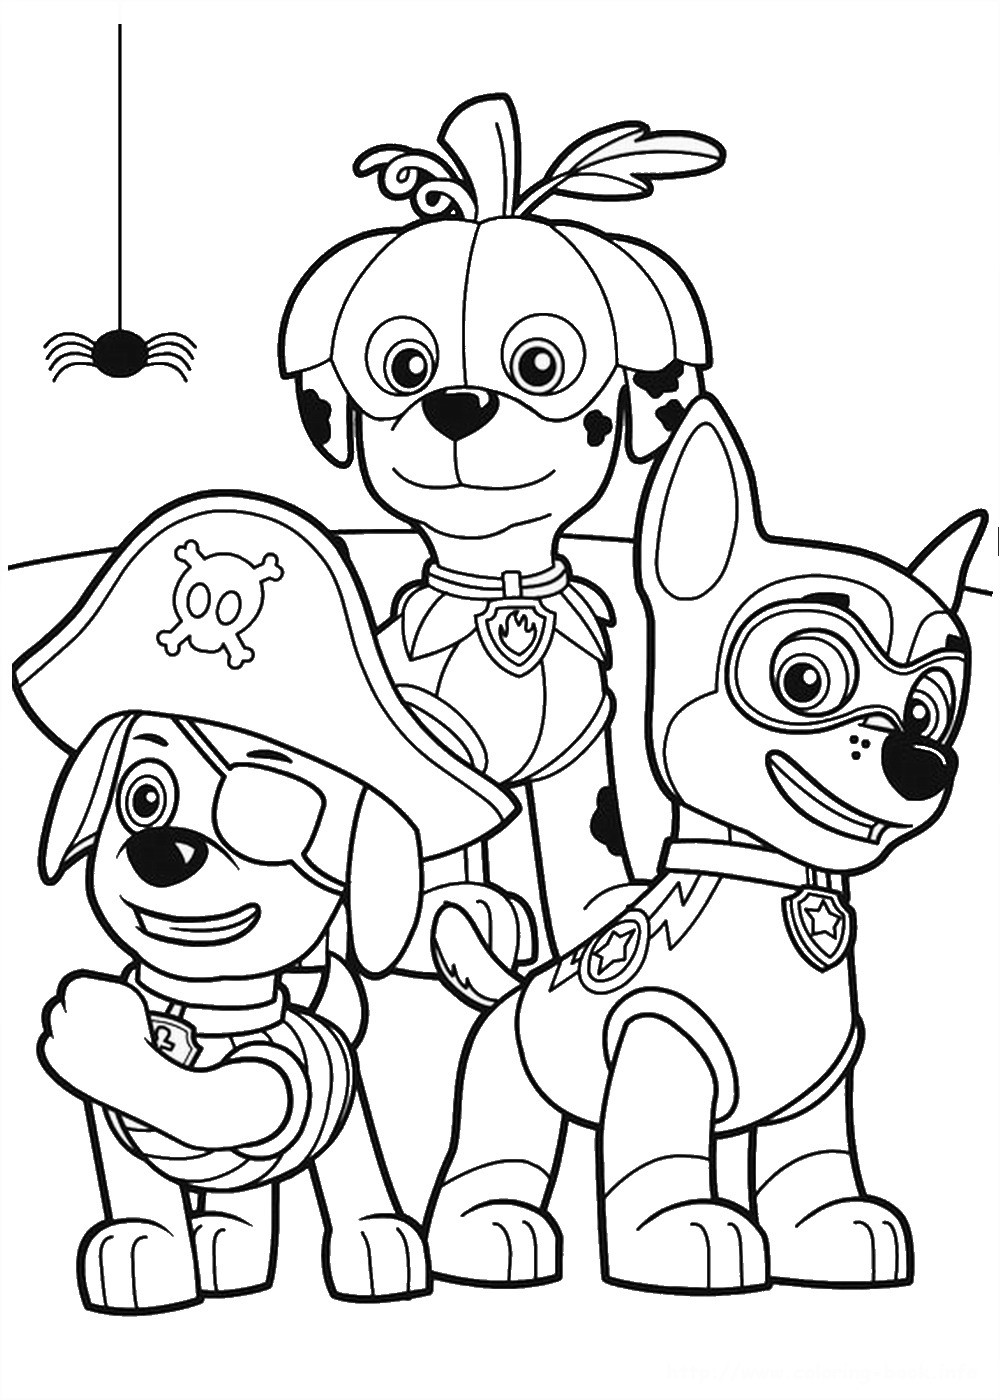 Paw Patrol Printable Coloring Sheets
 Paw Patrol Coloring Pages